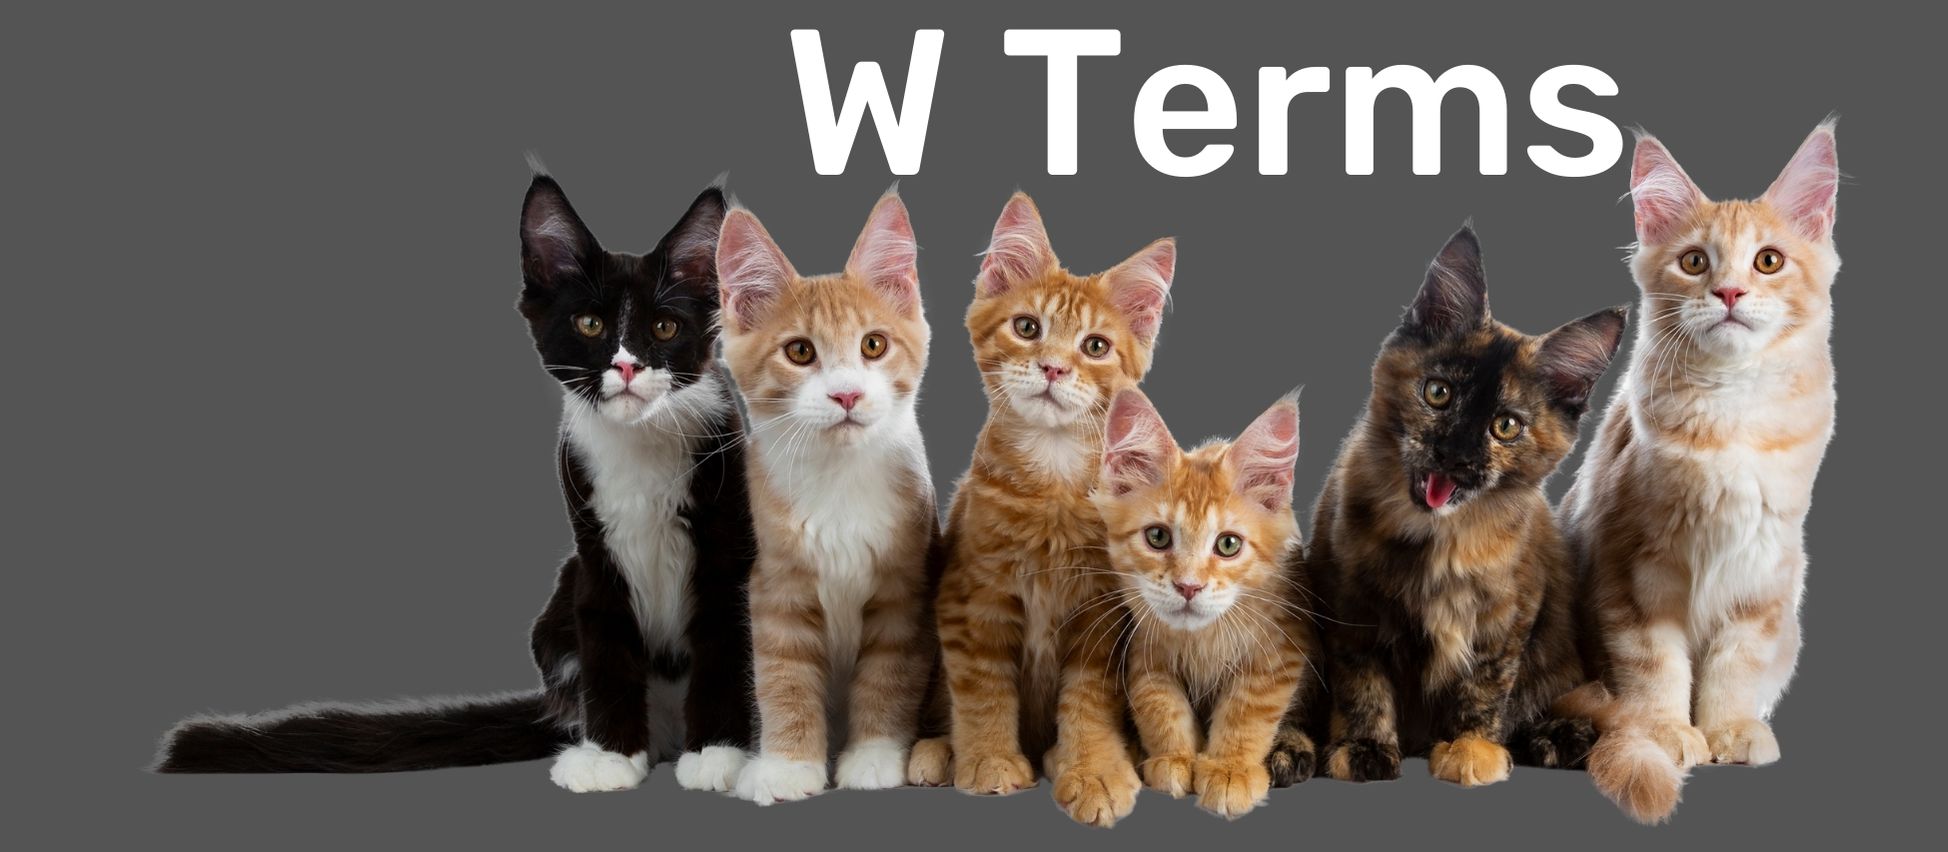 Group of six cats in front of a gray background with text reading 'W Terms' at the top to indicate a new section of the glossary